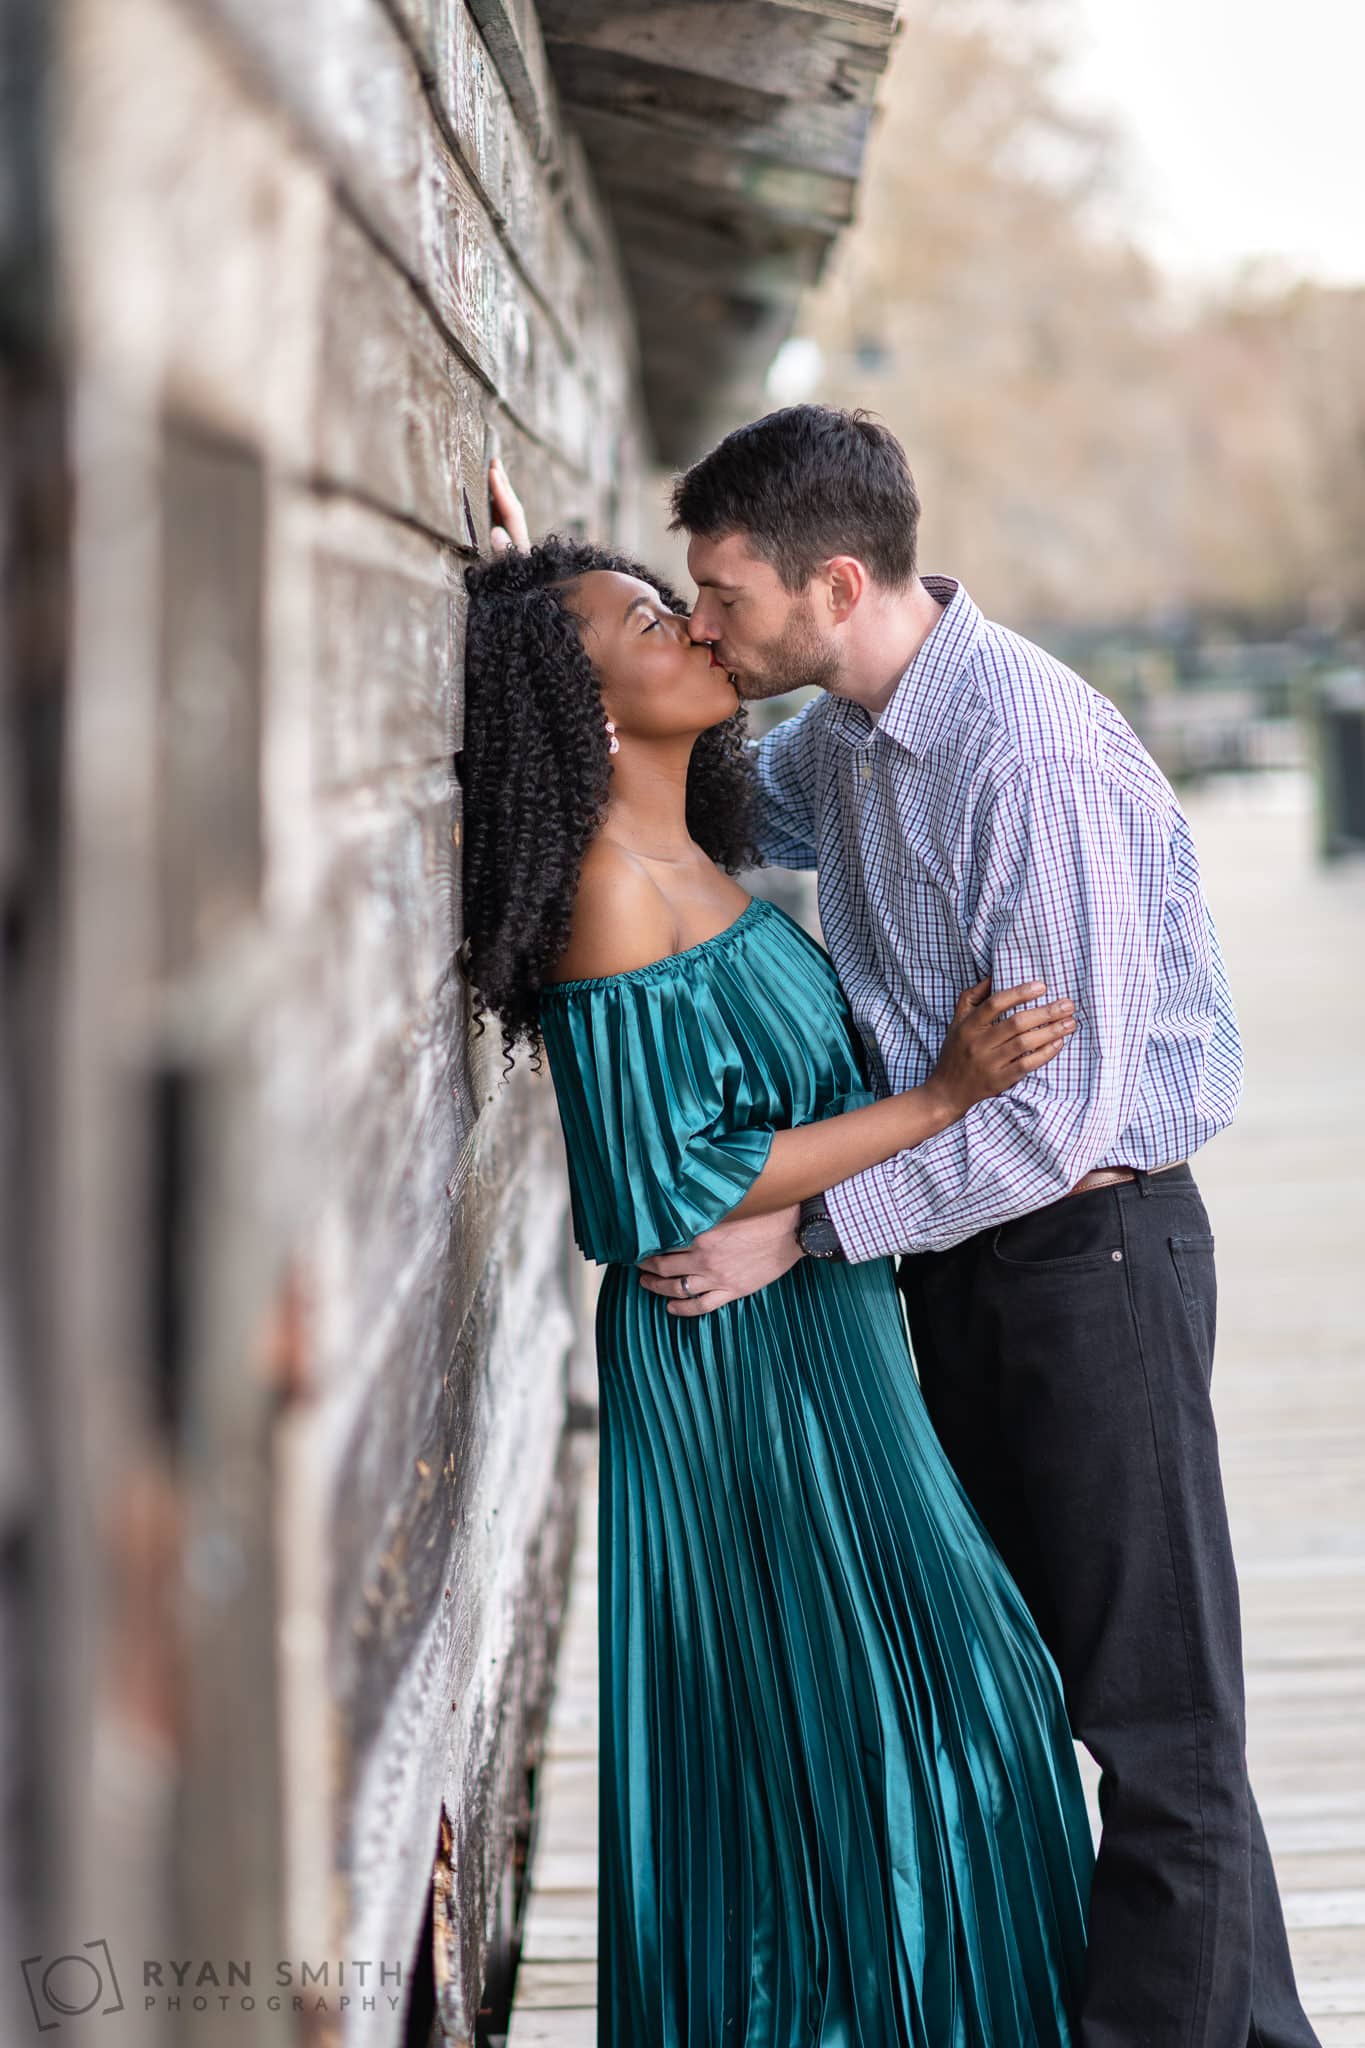 Kiss against the old wood wall - Conway Riverwalk